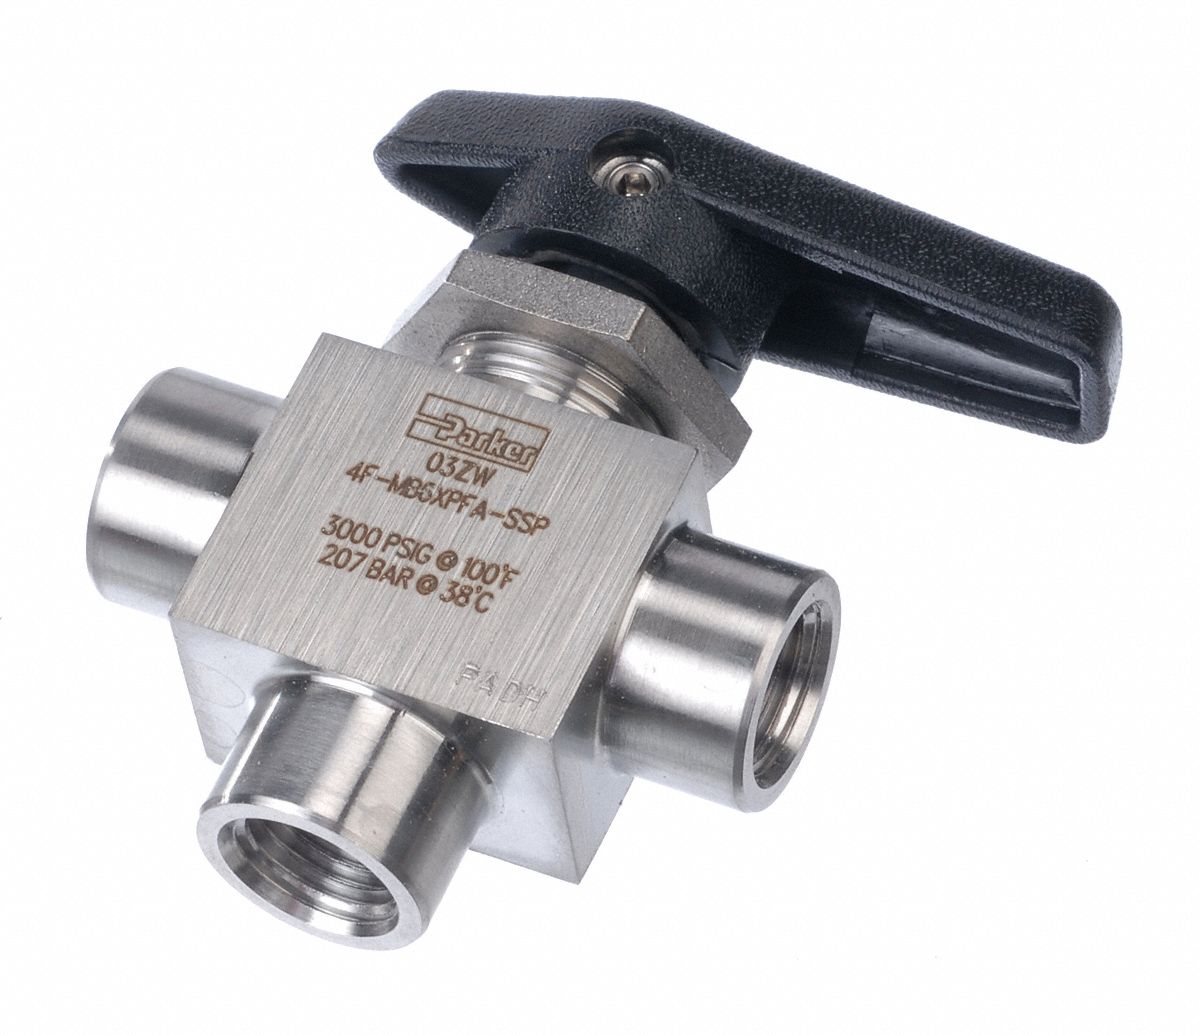 PARKER Ball Valve, 316 Stainless Steel, 3-Way, 1-Piece, Pipe Size 1/4